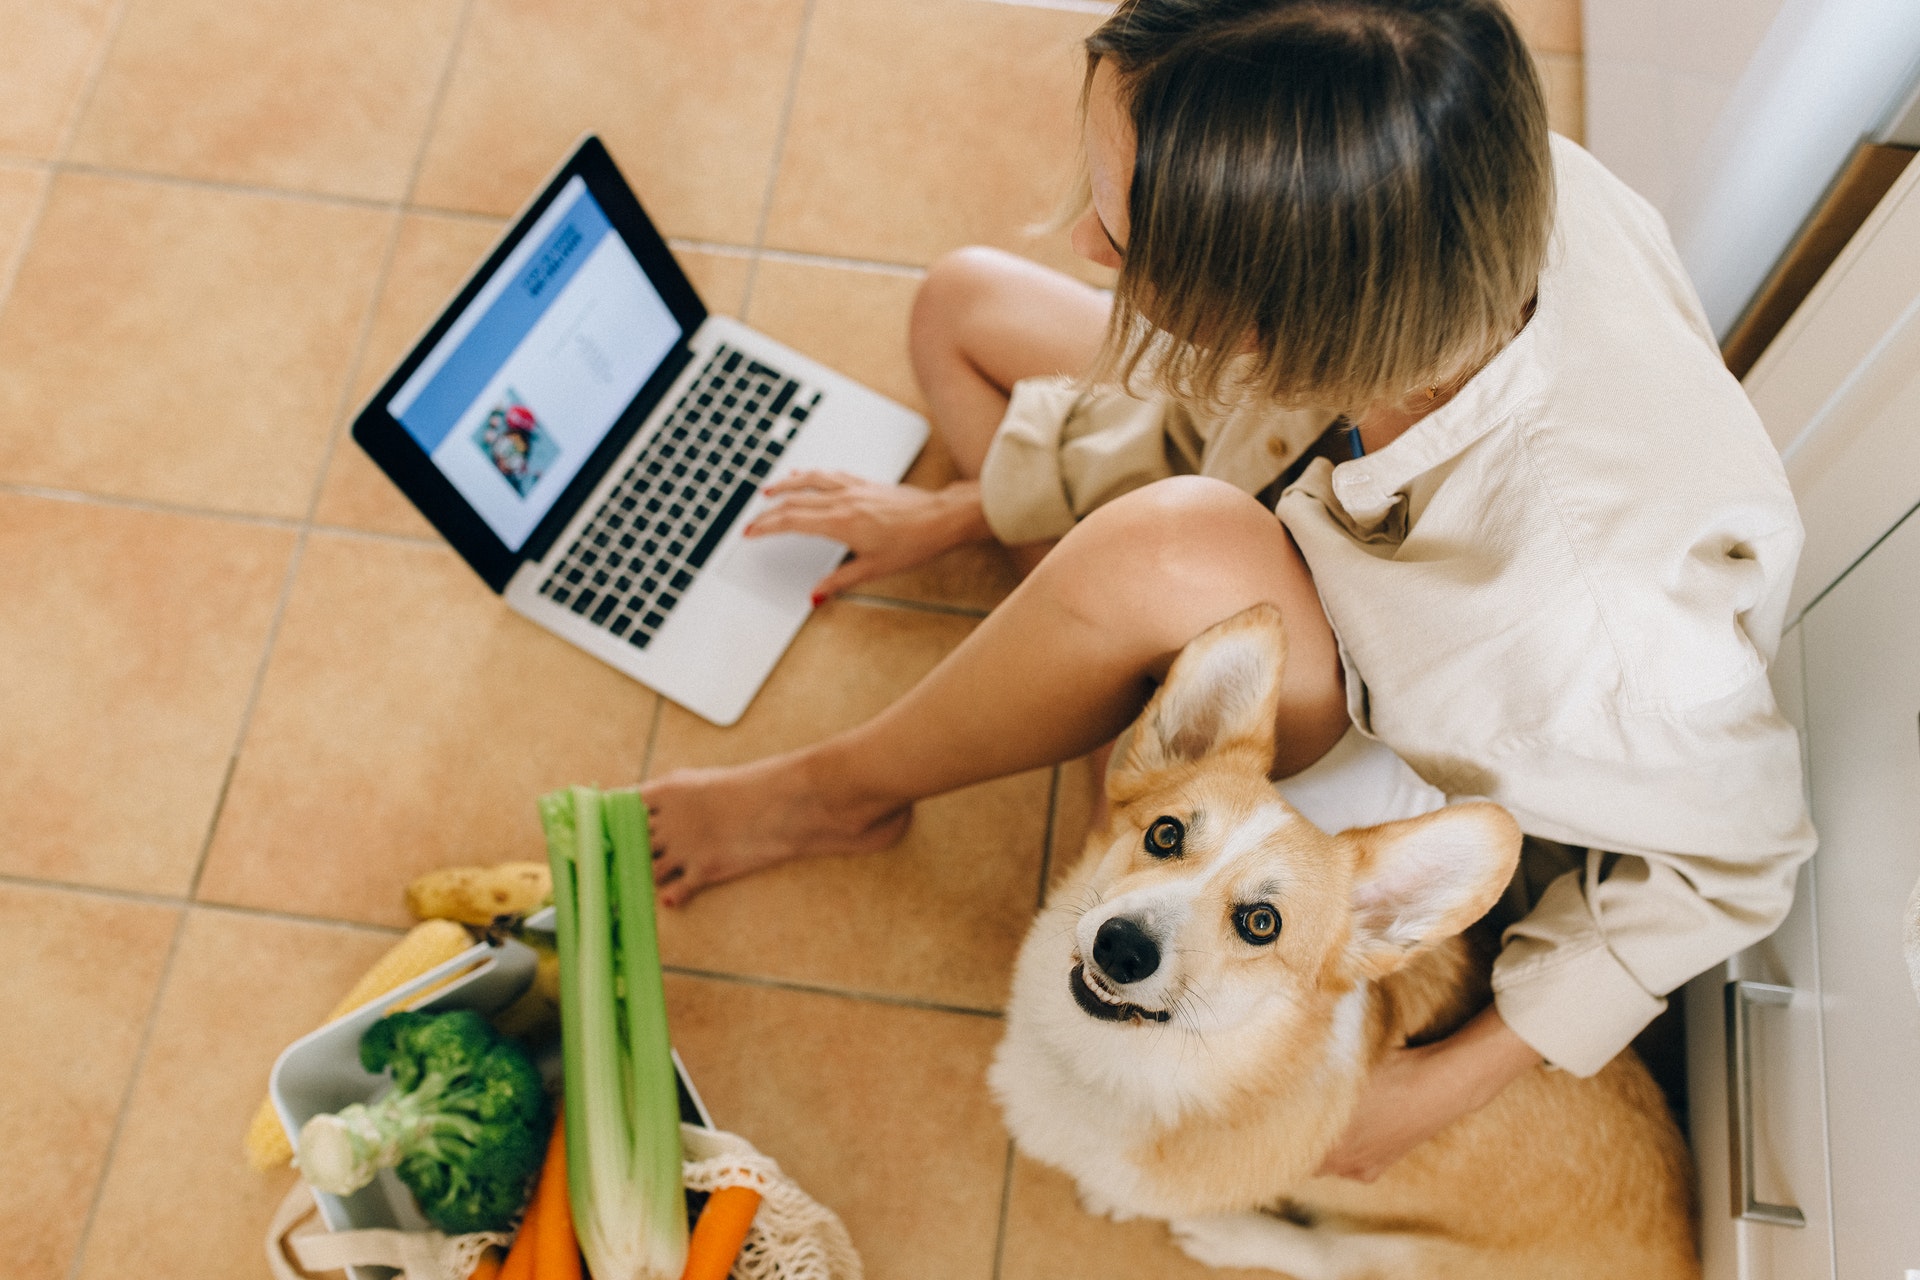 Customer buying online pet products having dog beside her.